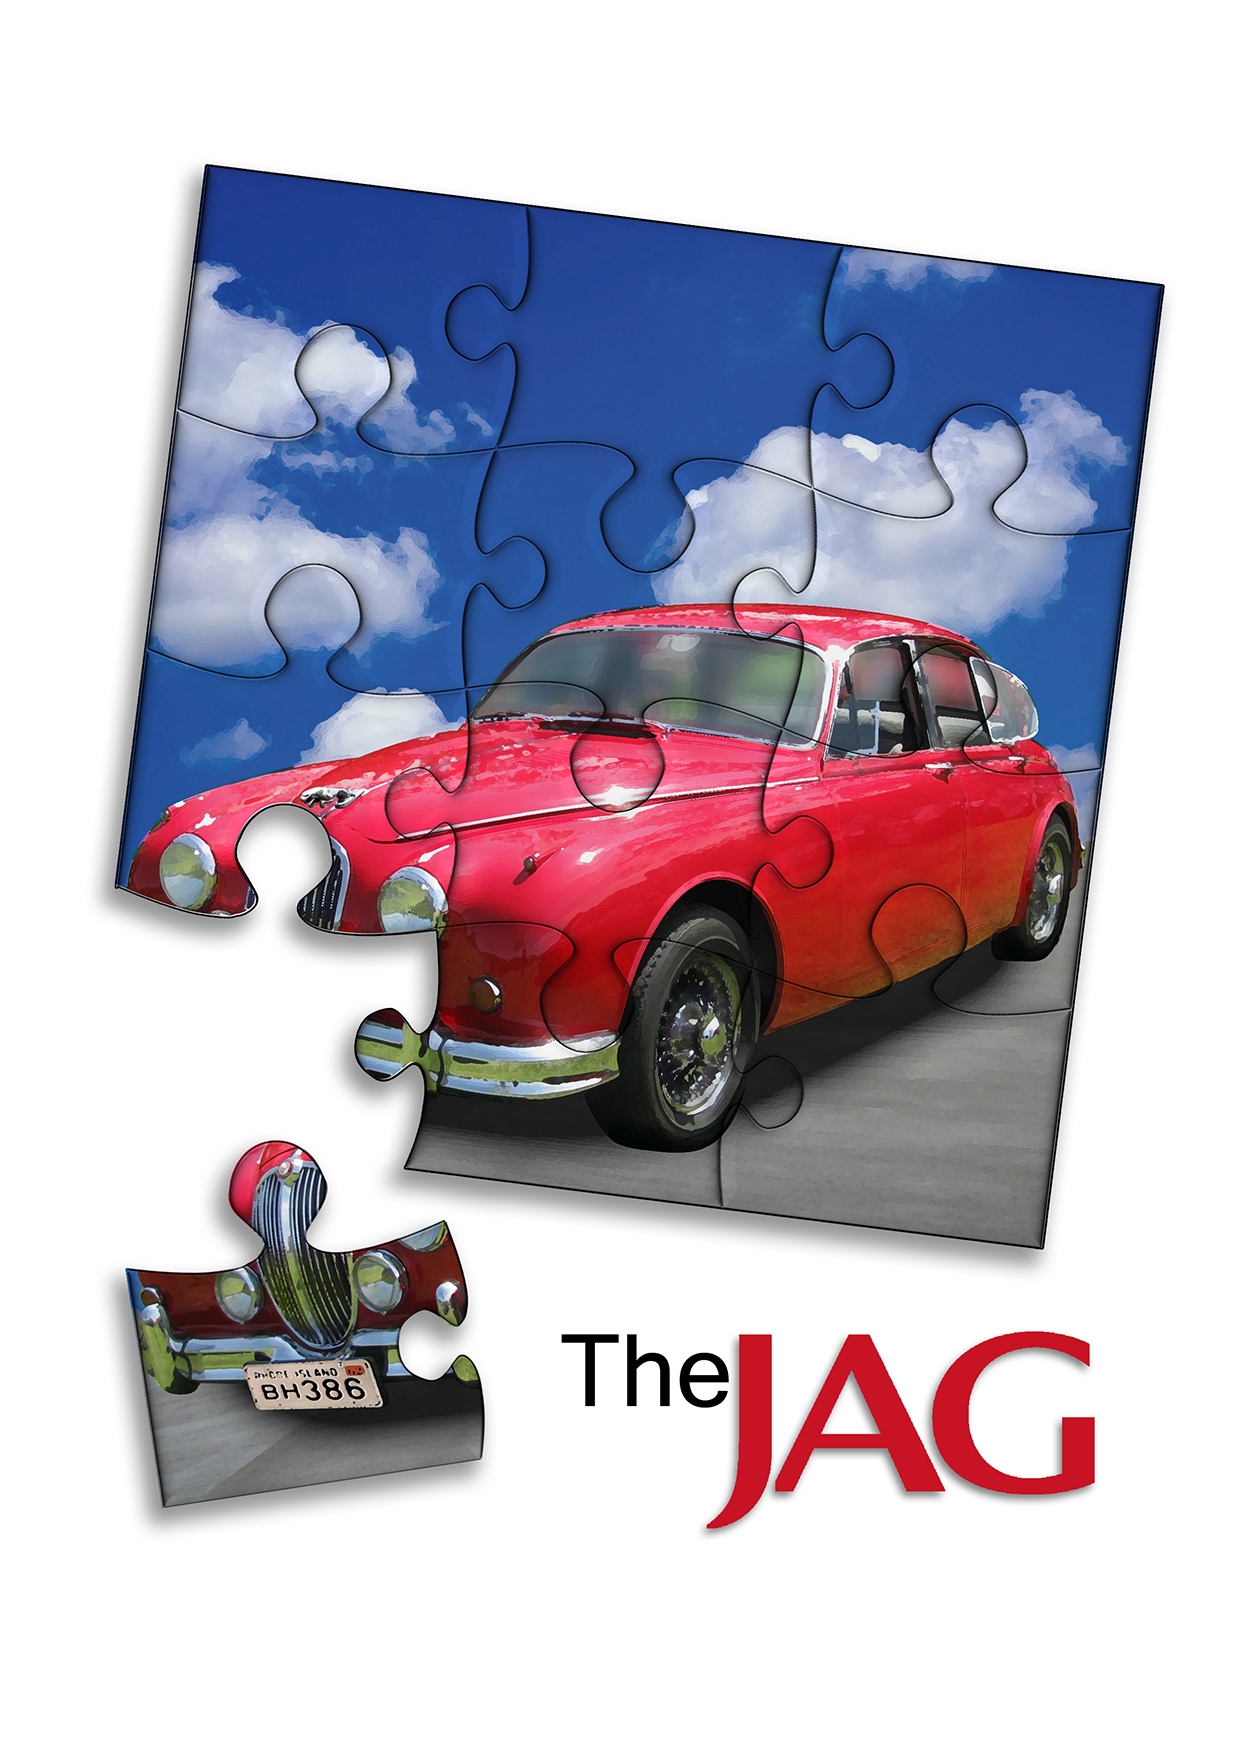 Puzzle of a red car with blue sky, one piece is separated from the completed puzzle. title of the play "The Jag"